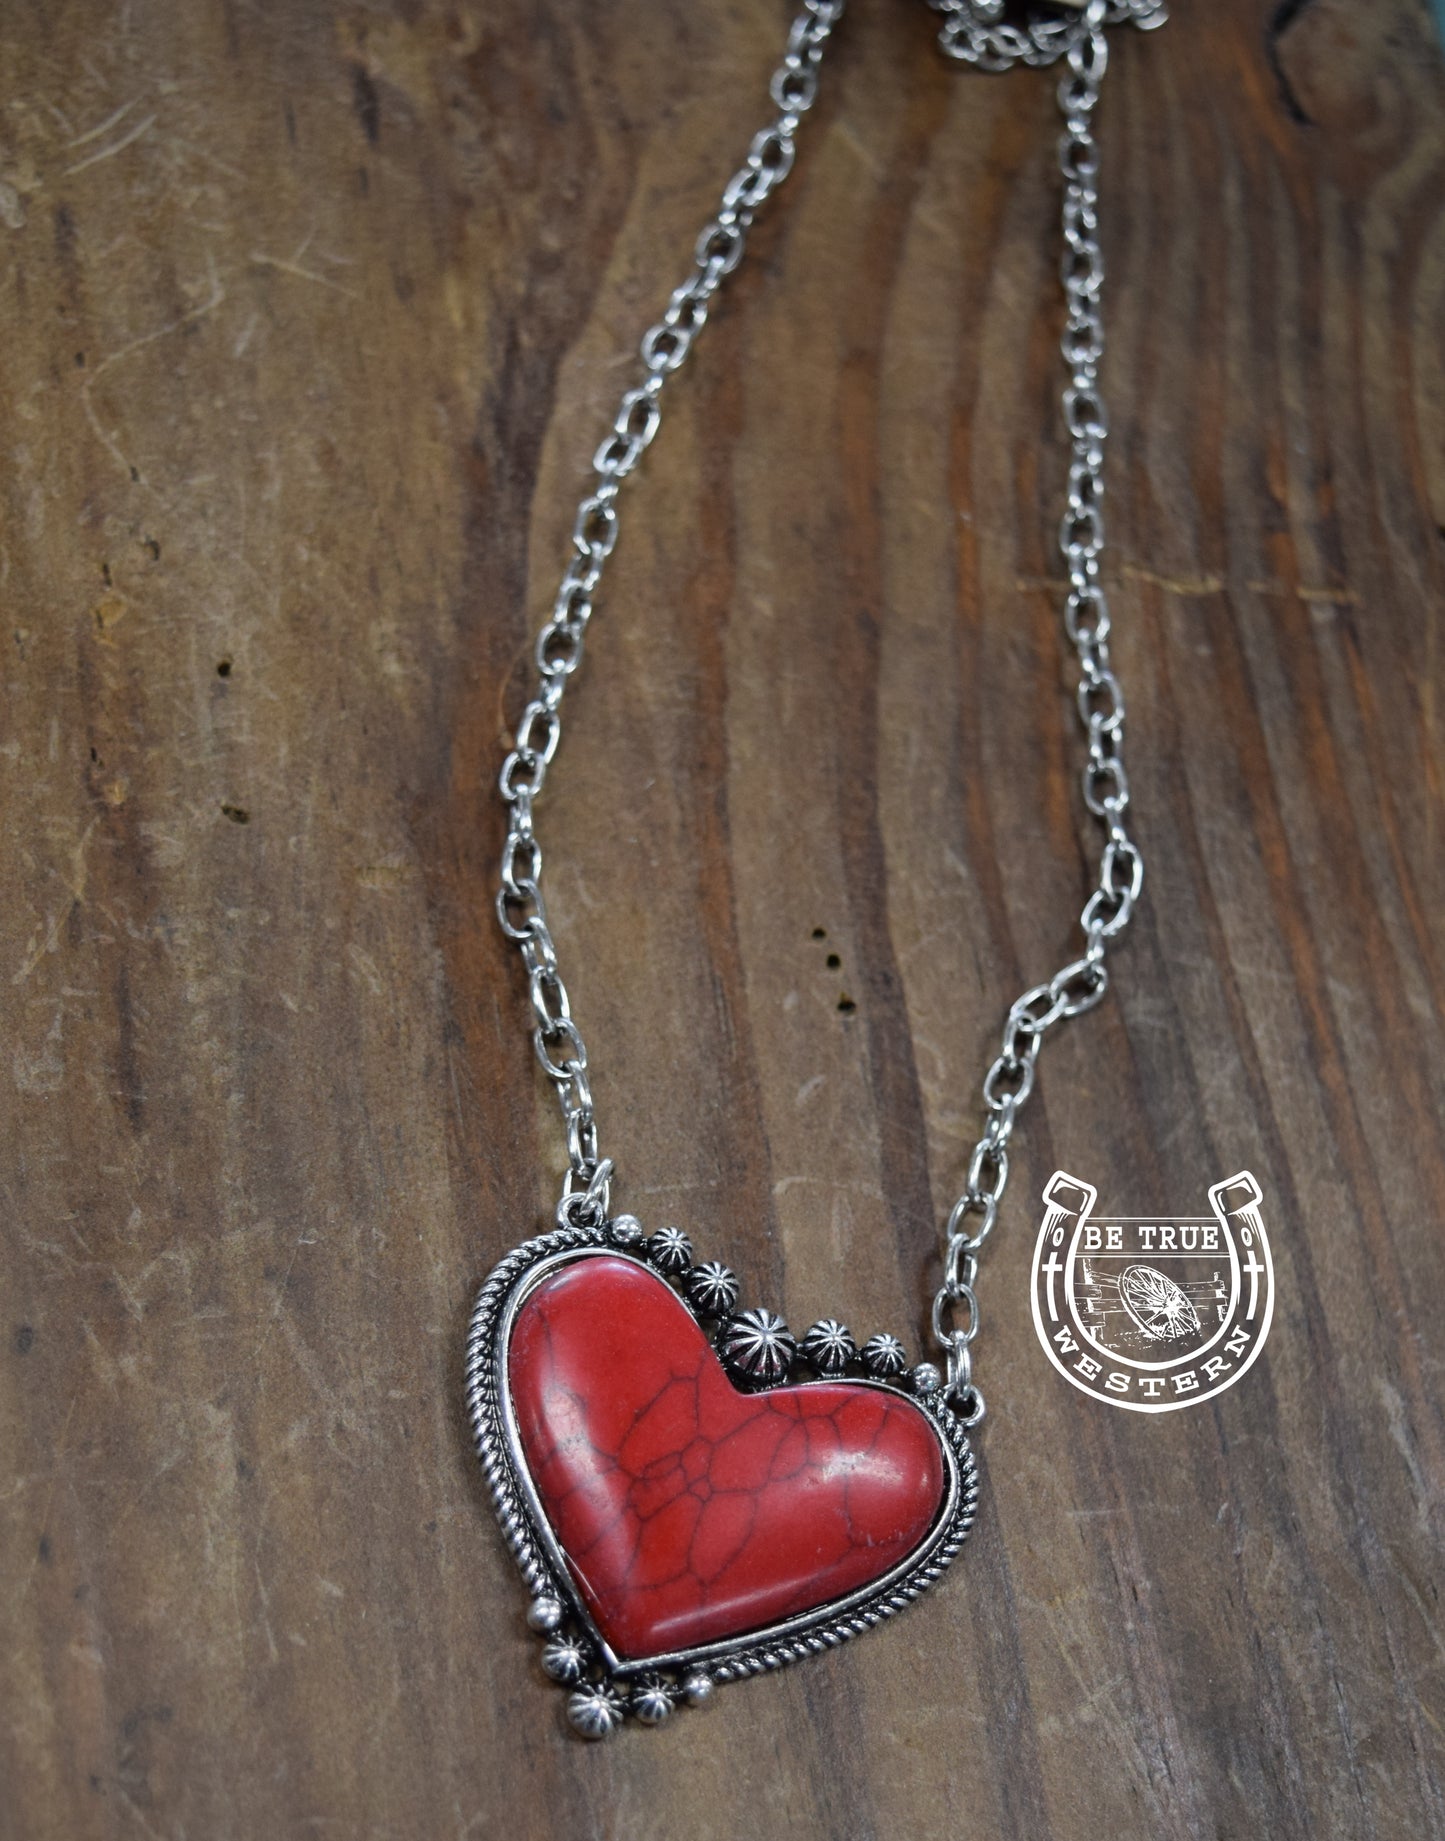 The Red Heart Necklace